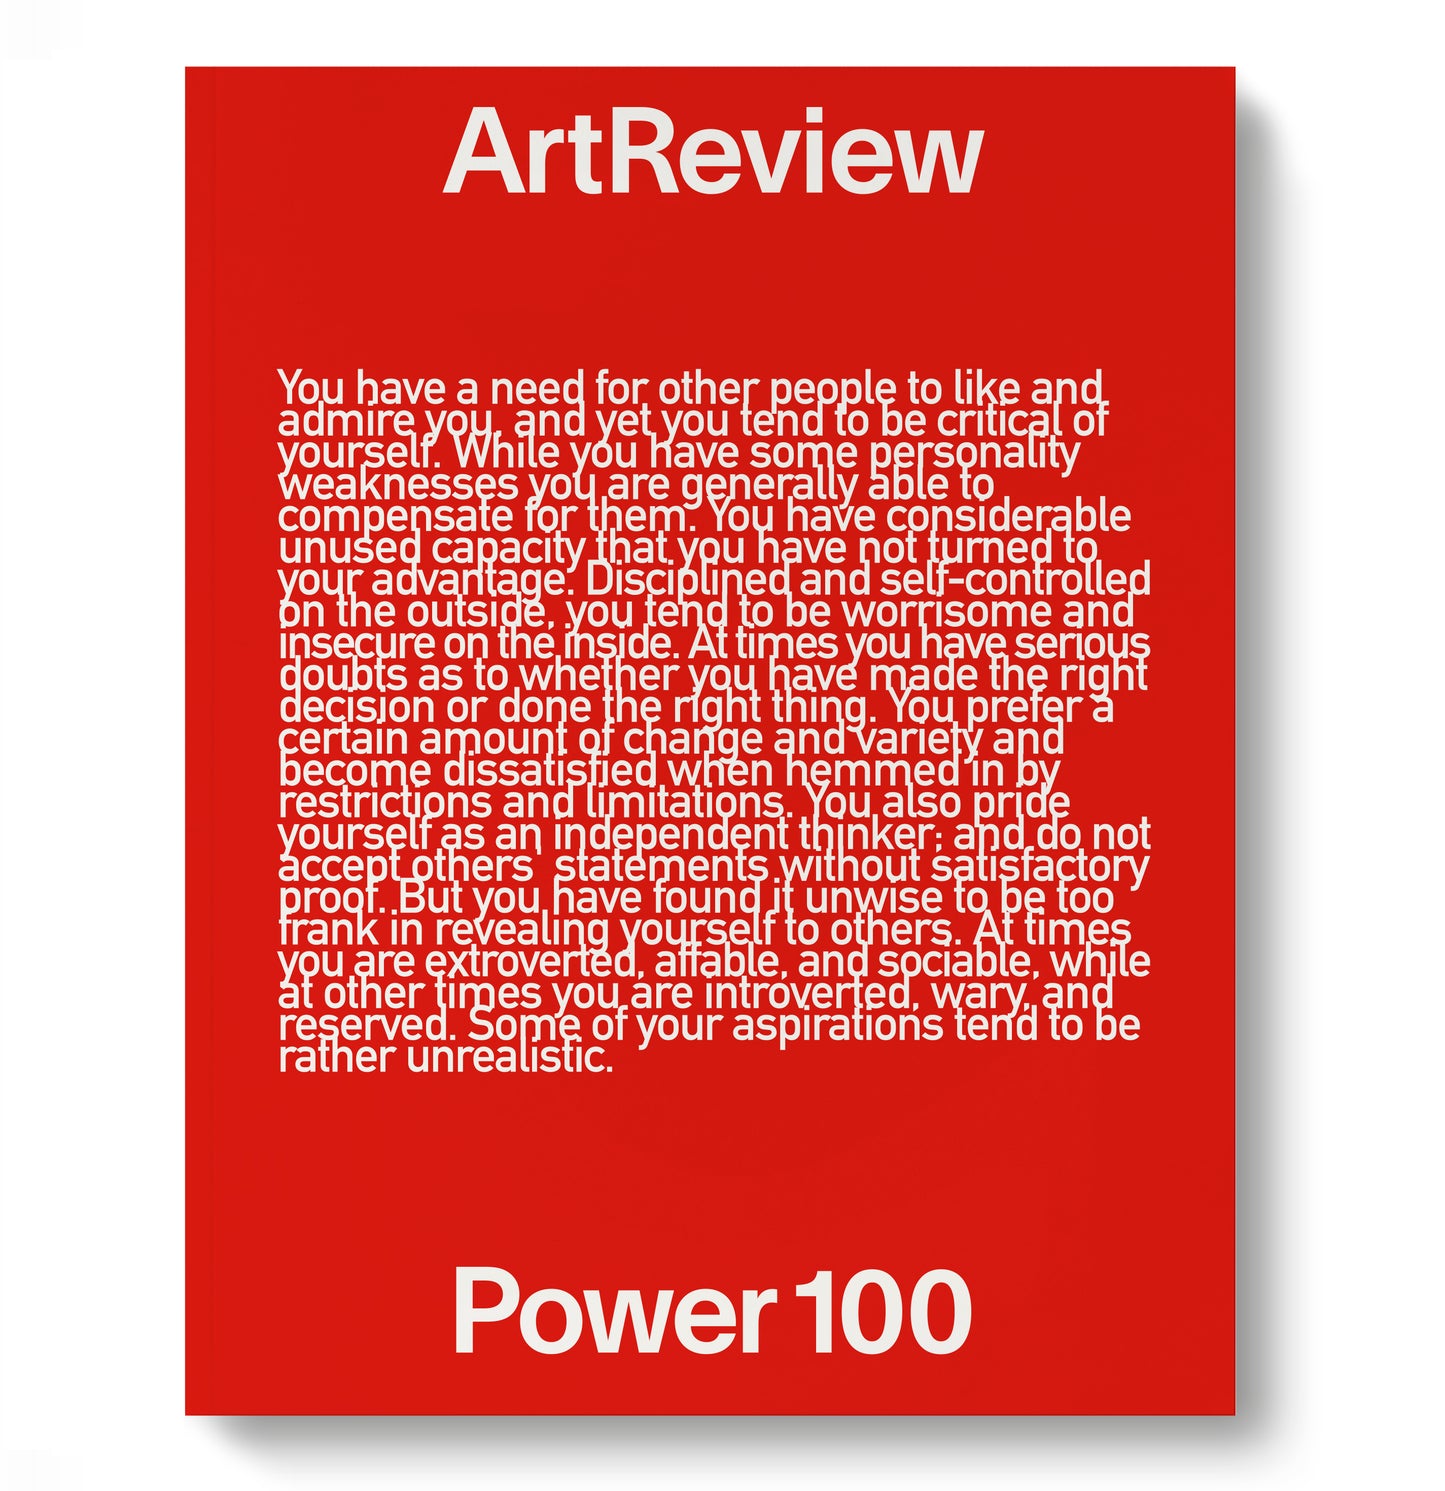 ArtReview November 2015 - Power 100